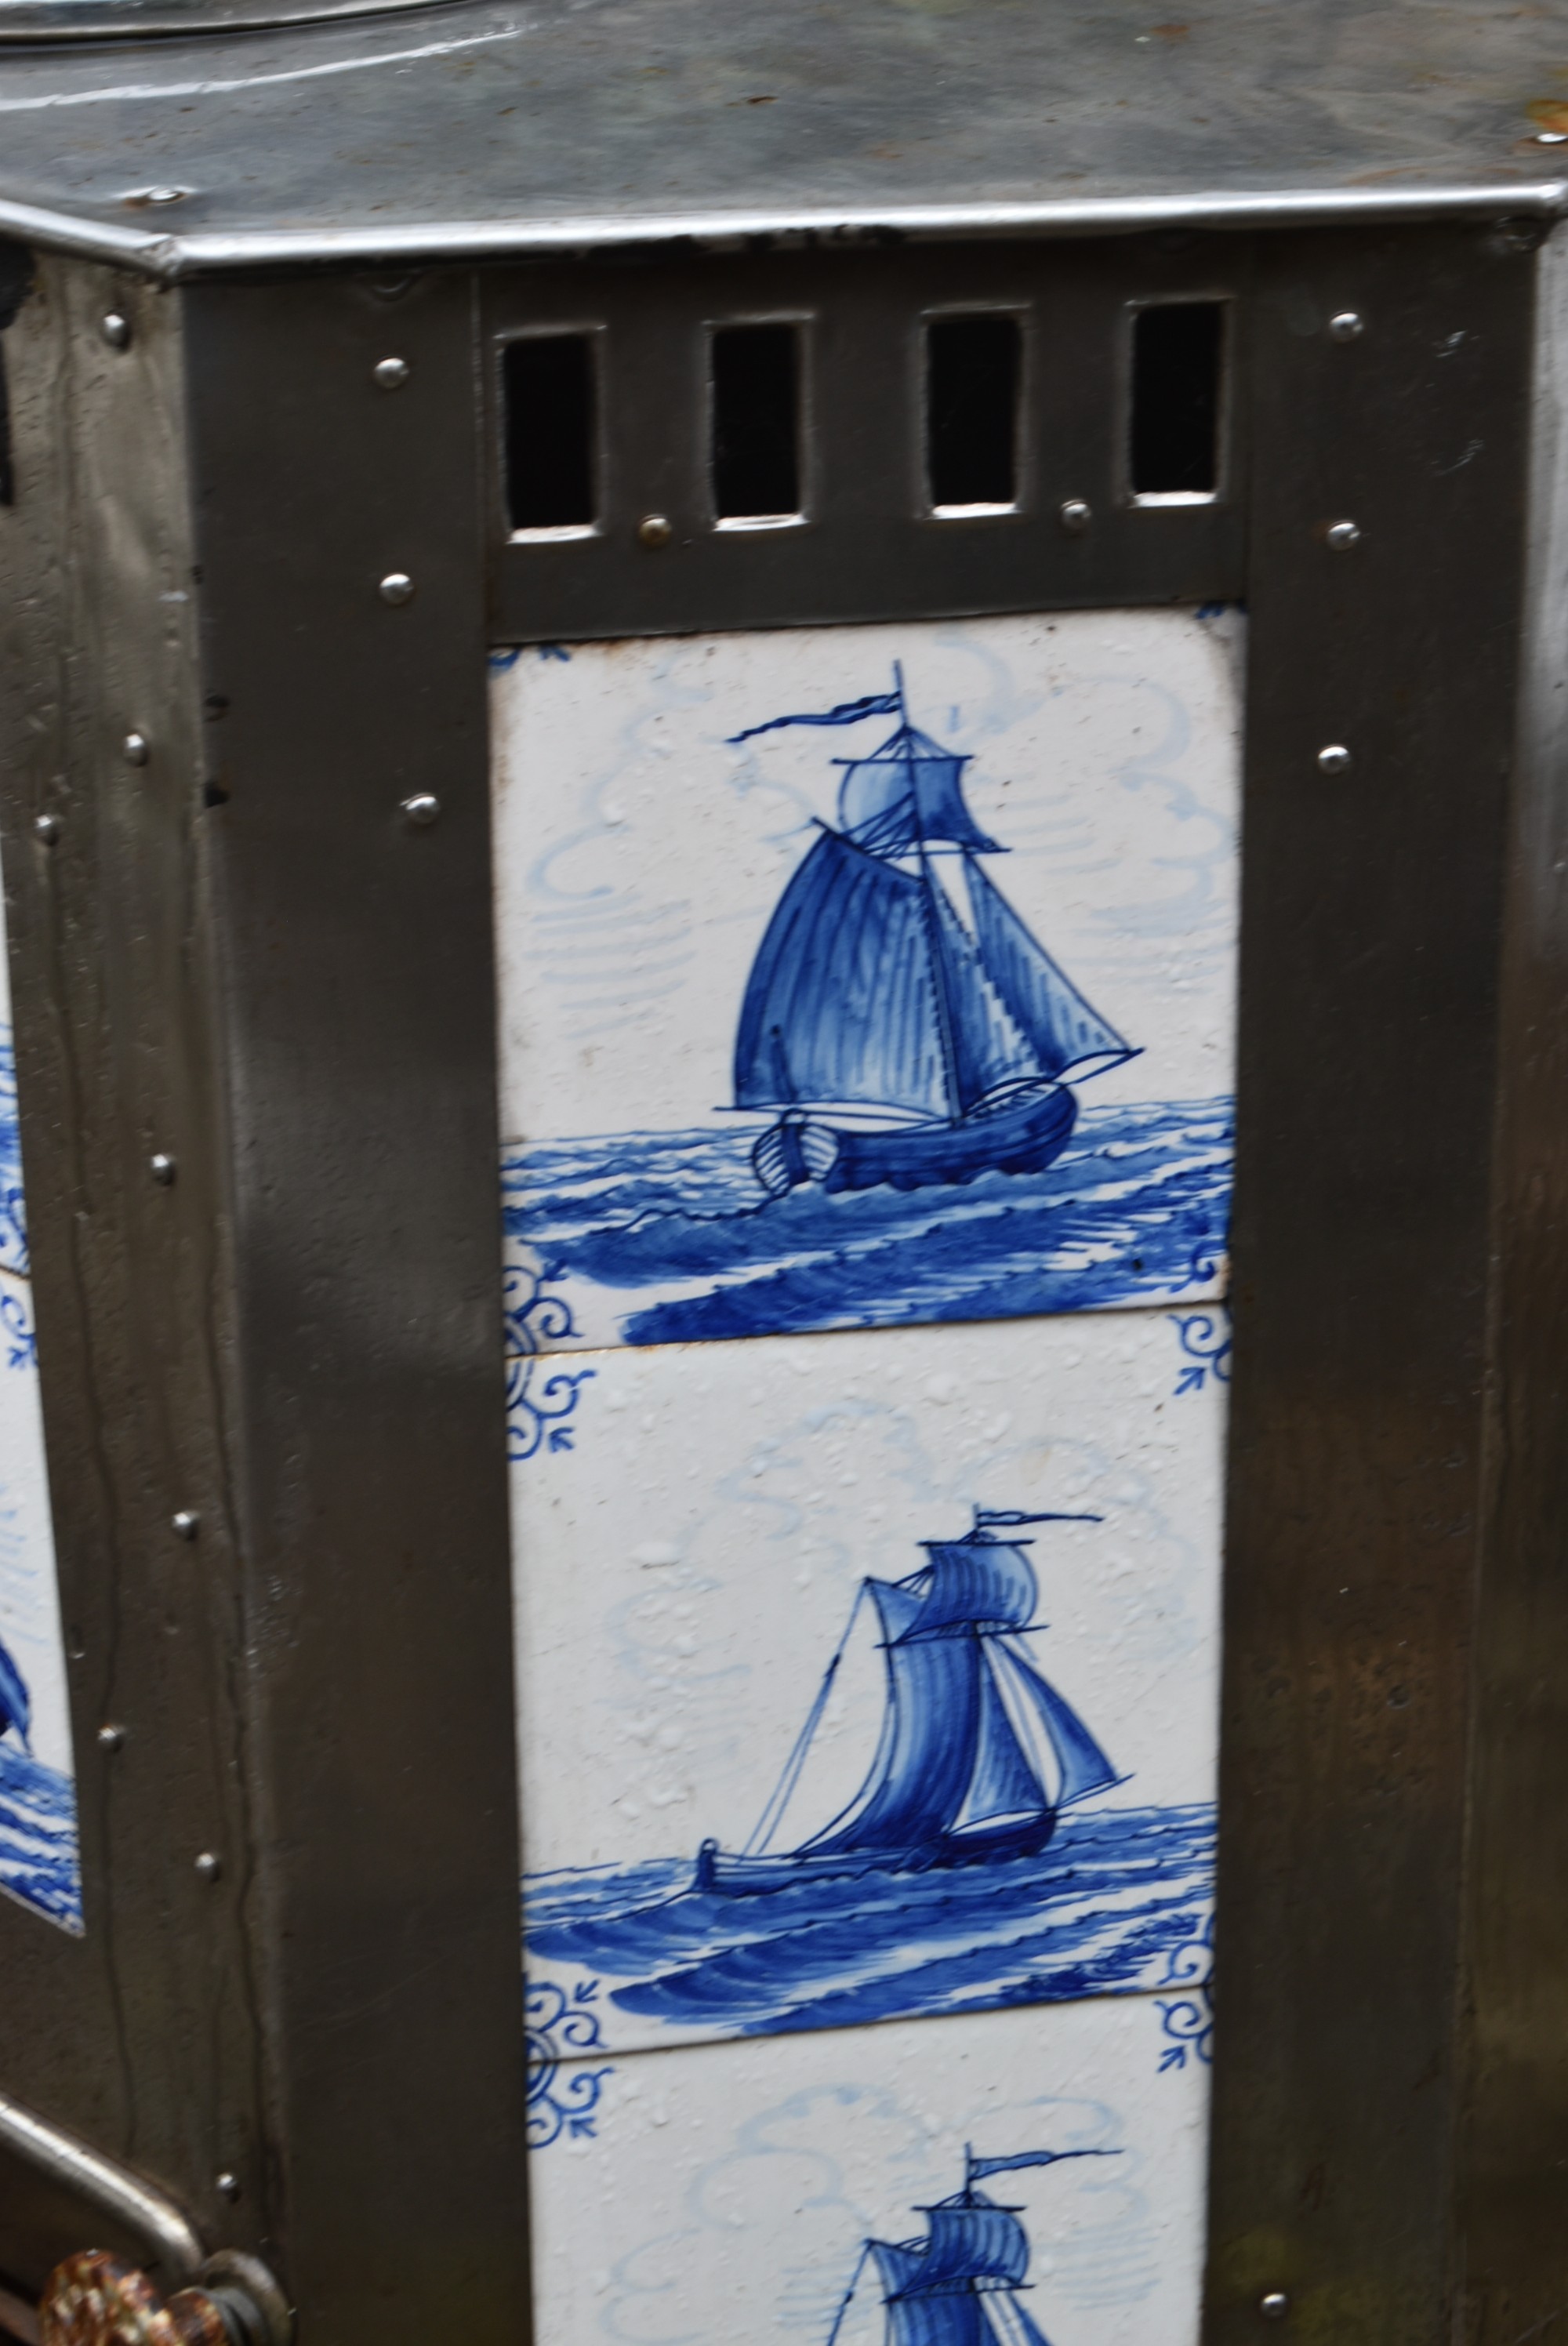 A late 19th century Dutch steel free standing fireplace with inset blue and white sailboat tiles - Image 3 of 4